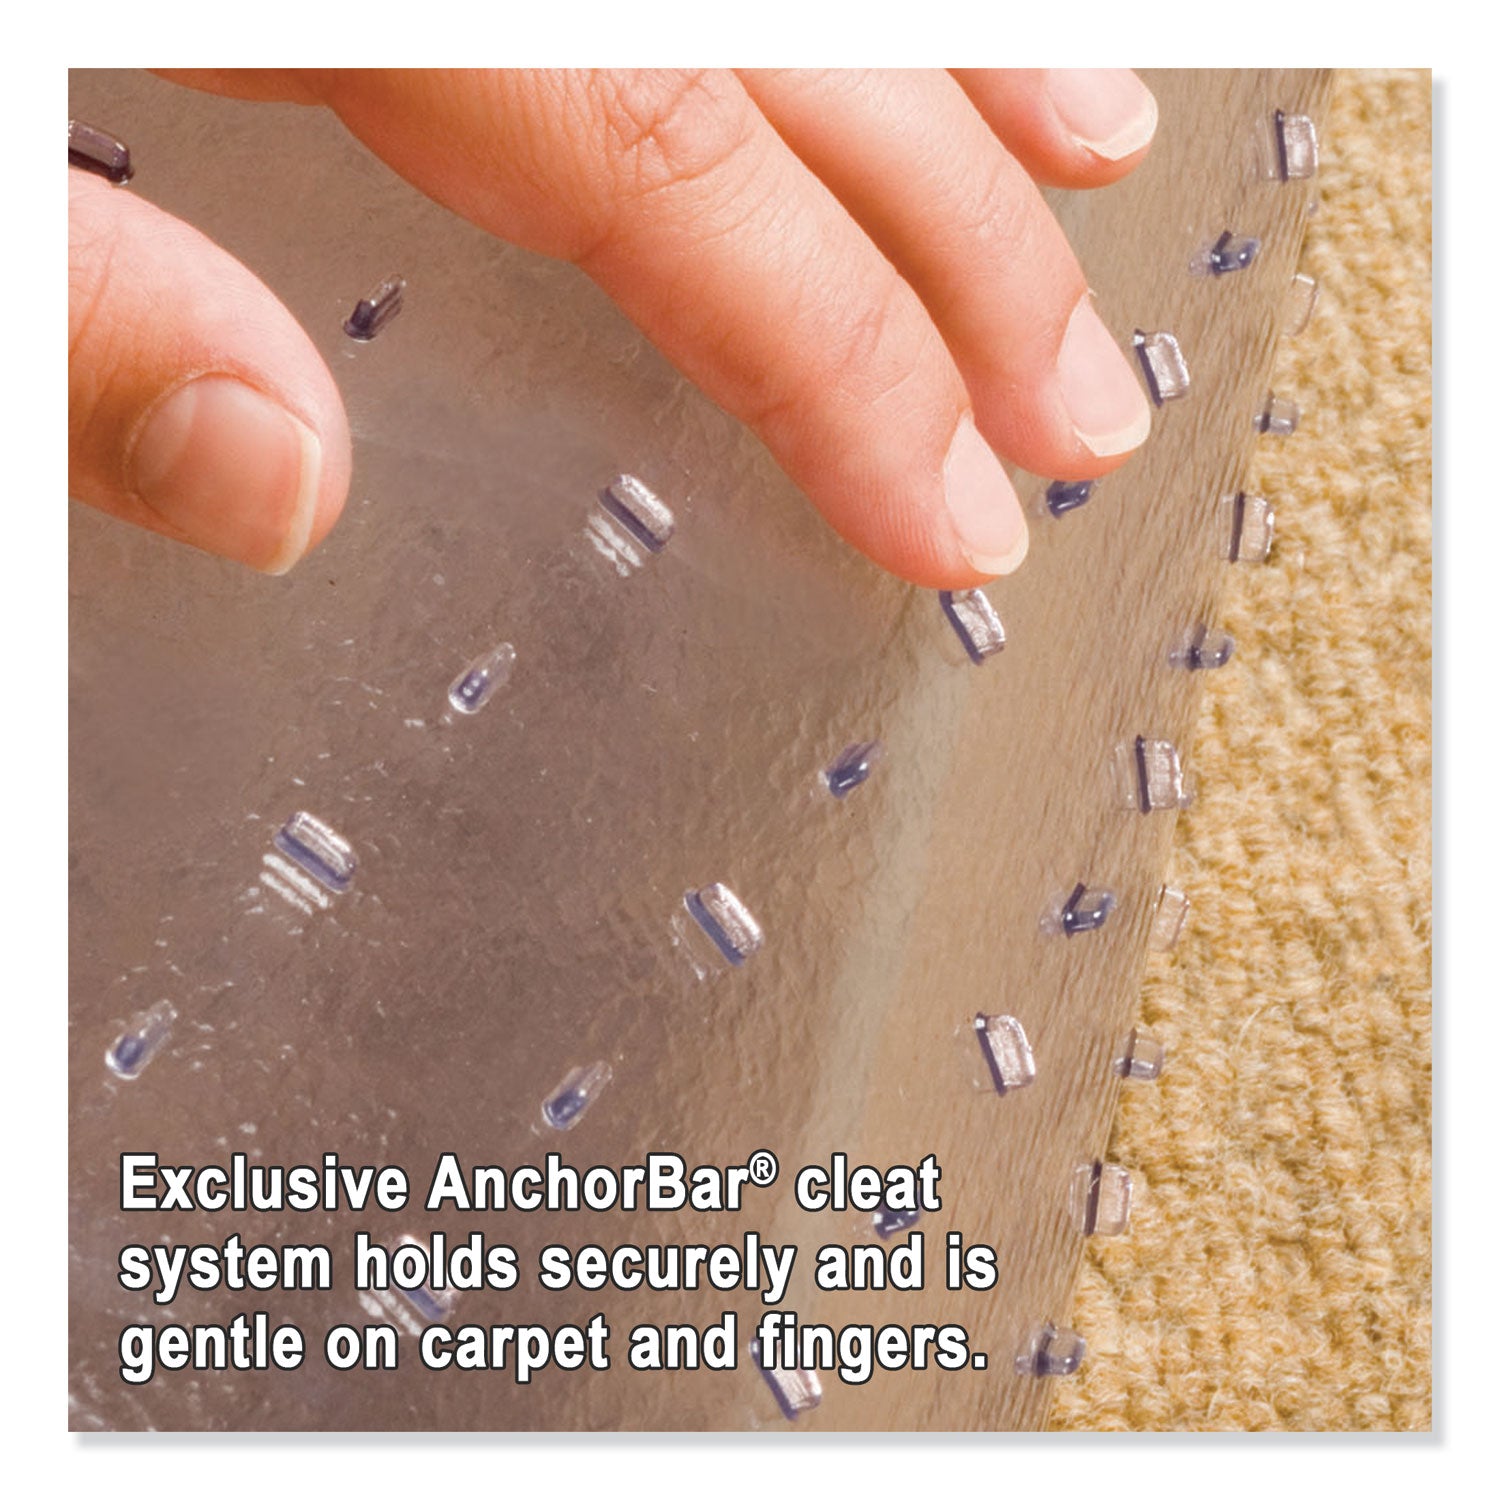 Natural Origins Chair Mat with Lip For Carpet, 45 x 53, Clear - 